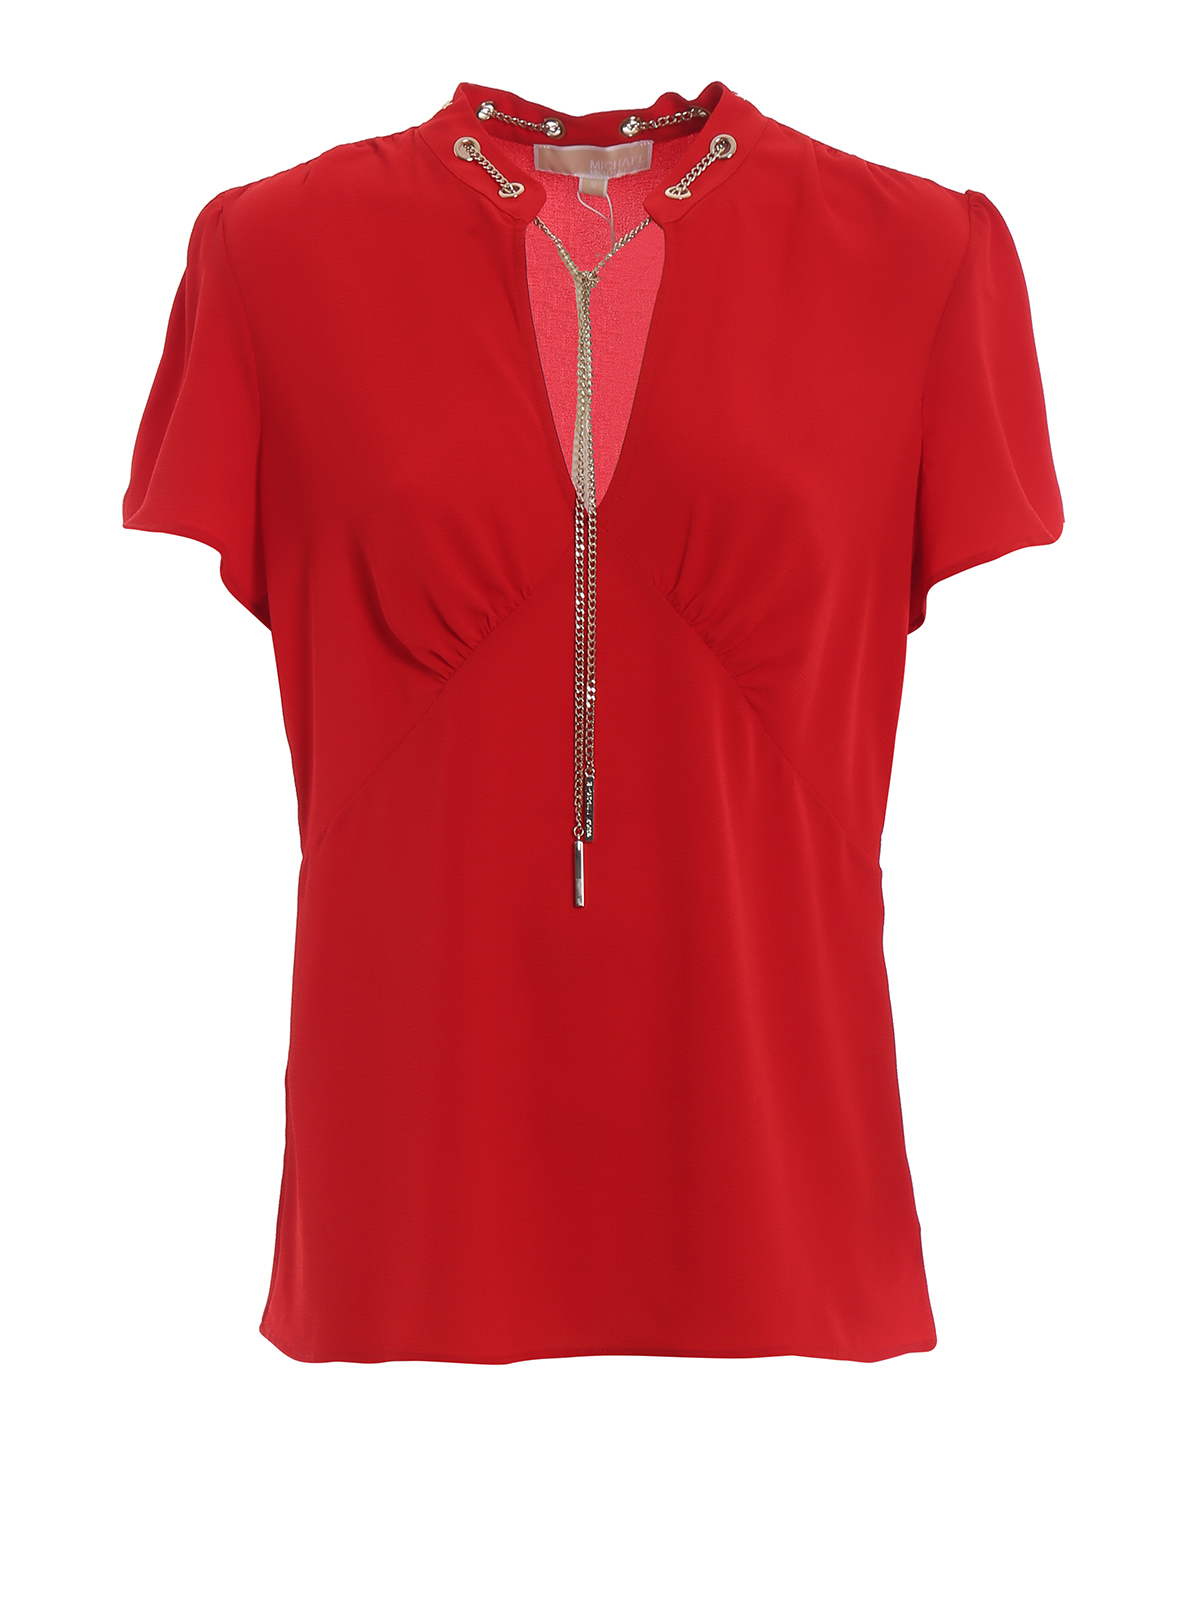 Michael Kors Red blouse gold-tone chain - MS94LTC4YP610